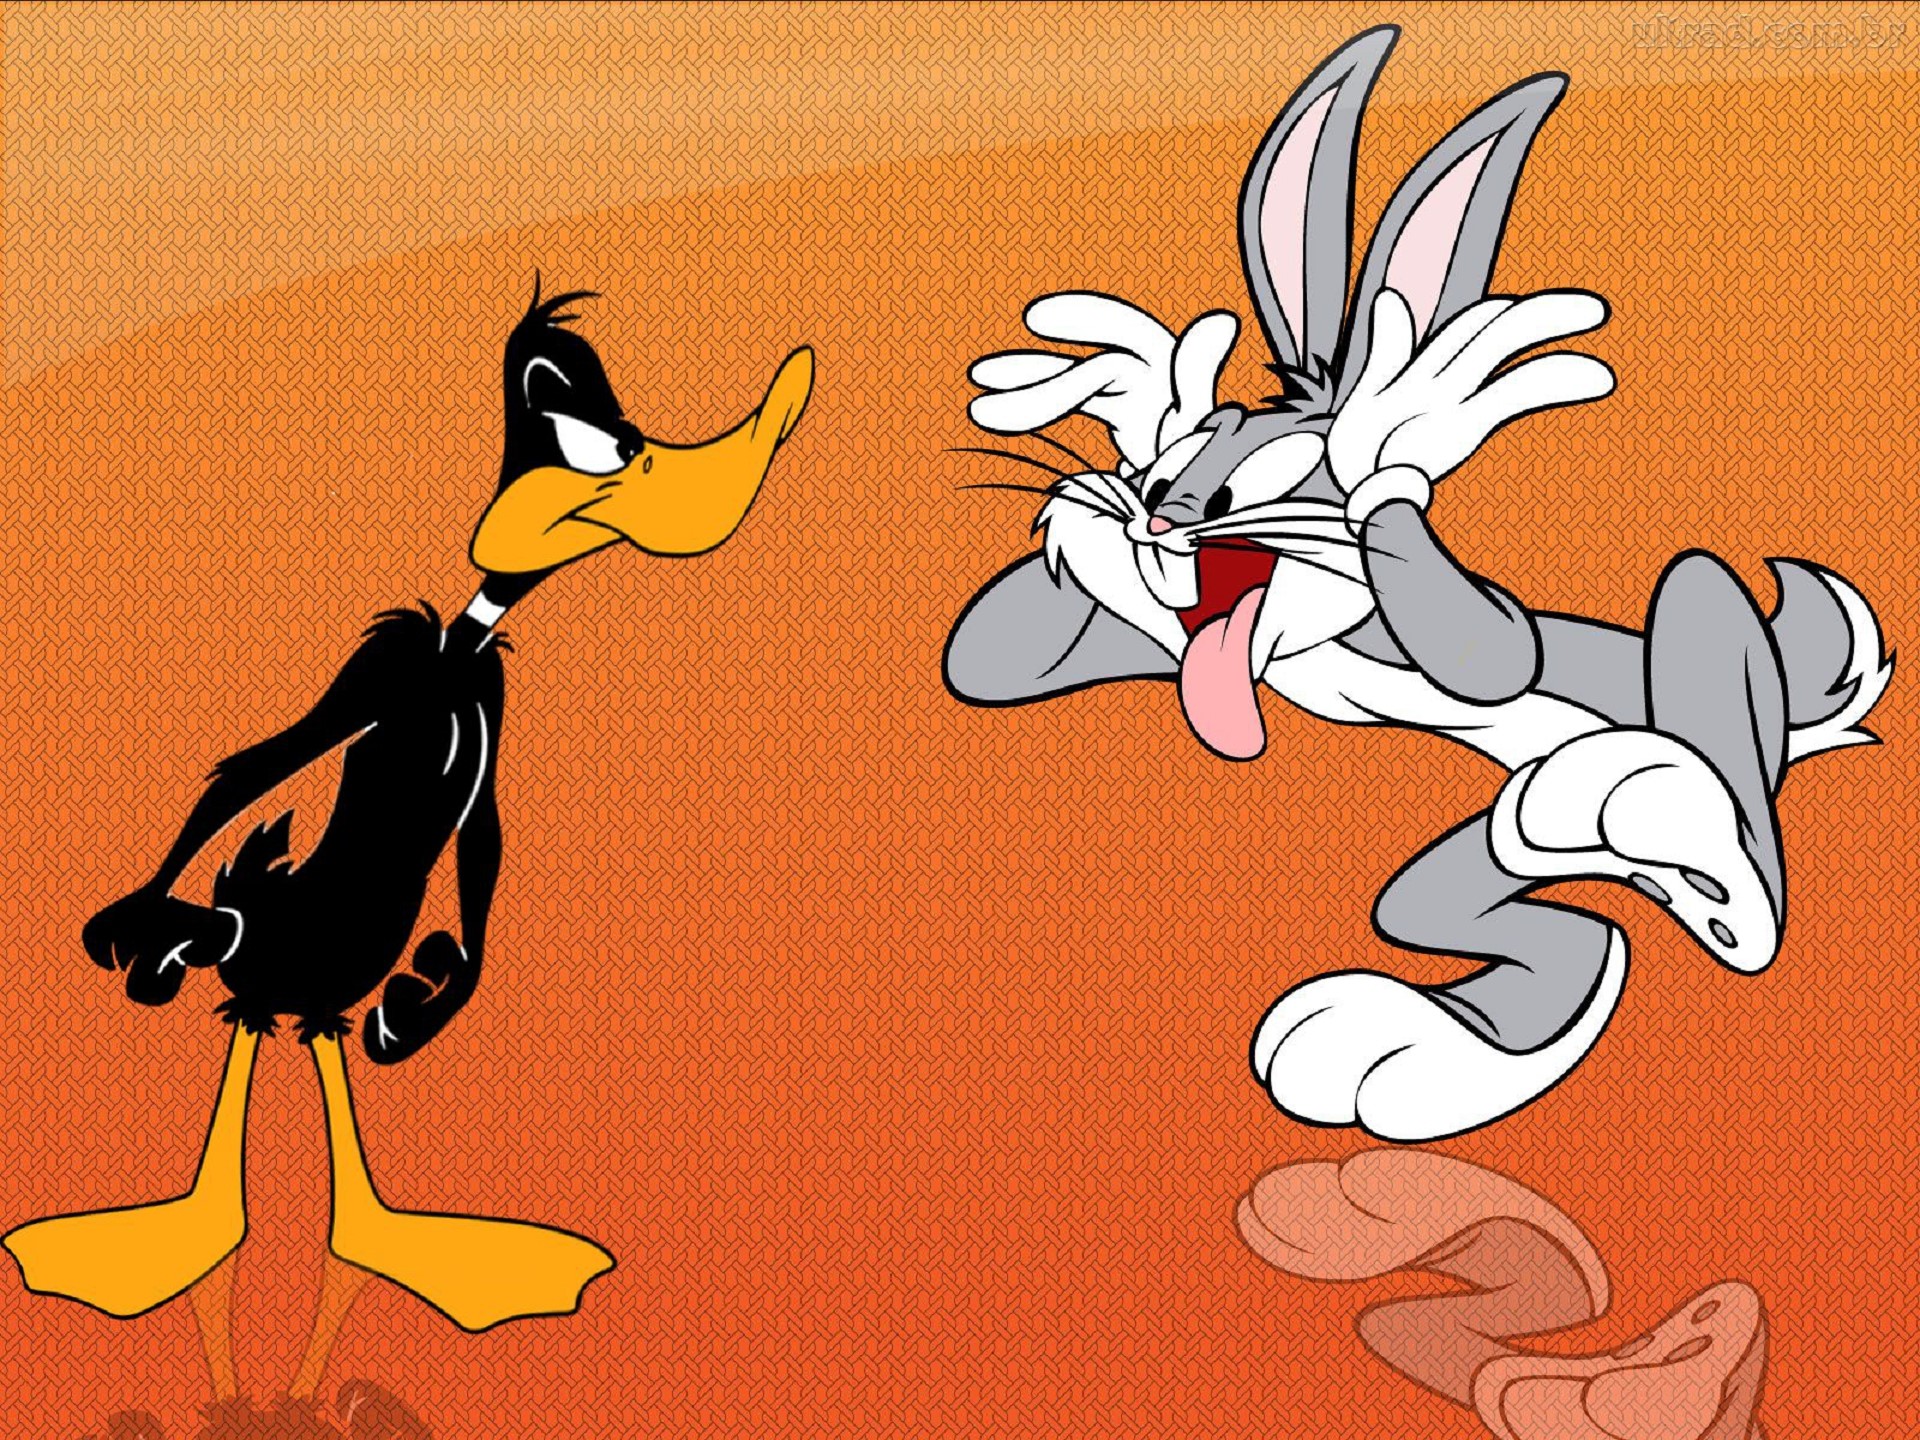 Bugs bunny and daffy duck 2K wallpaper download